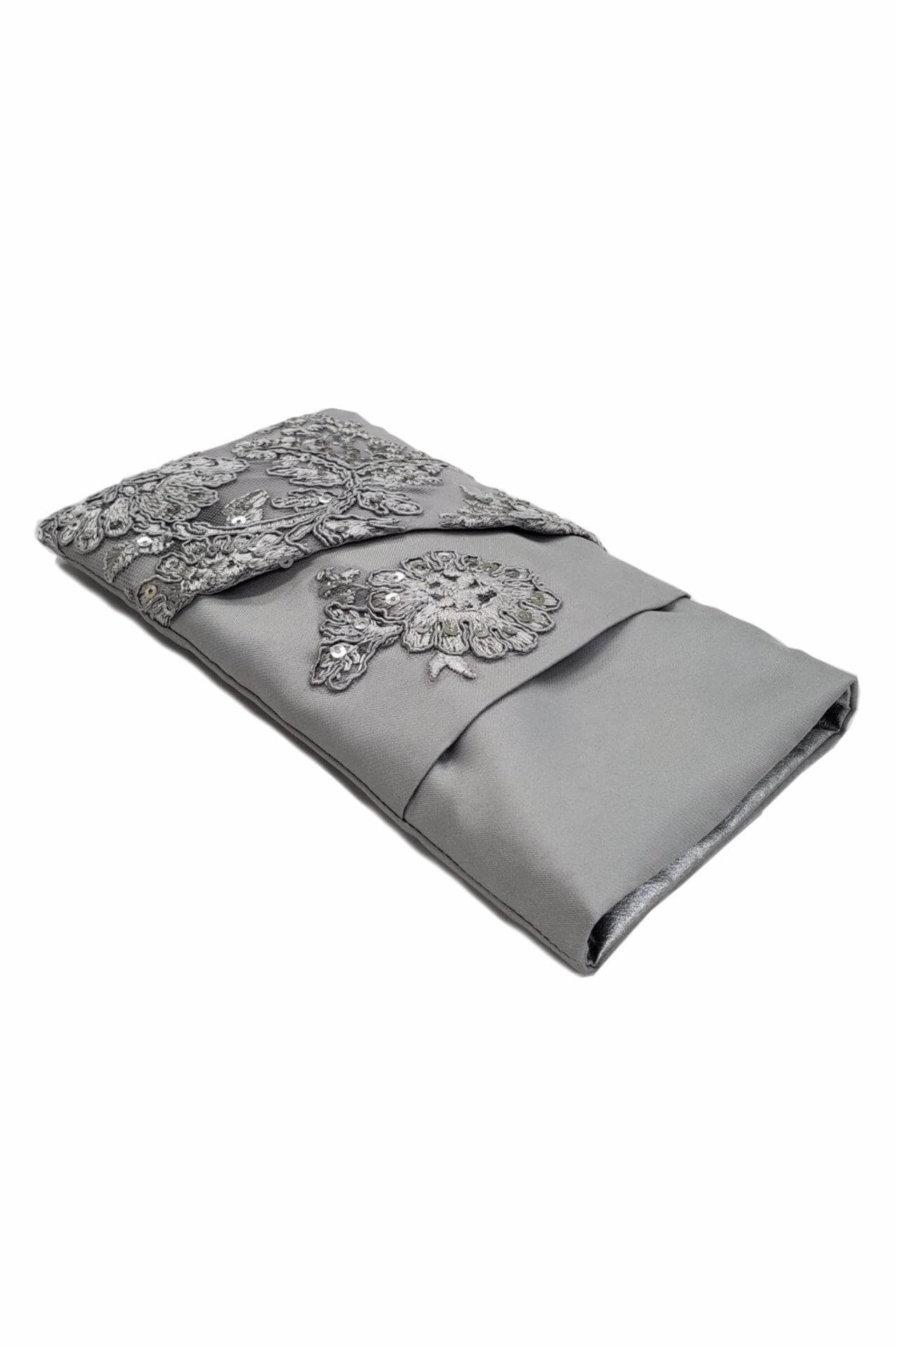 Chie Chic Posh Magical Case & Mask - Spangle Grey